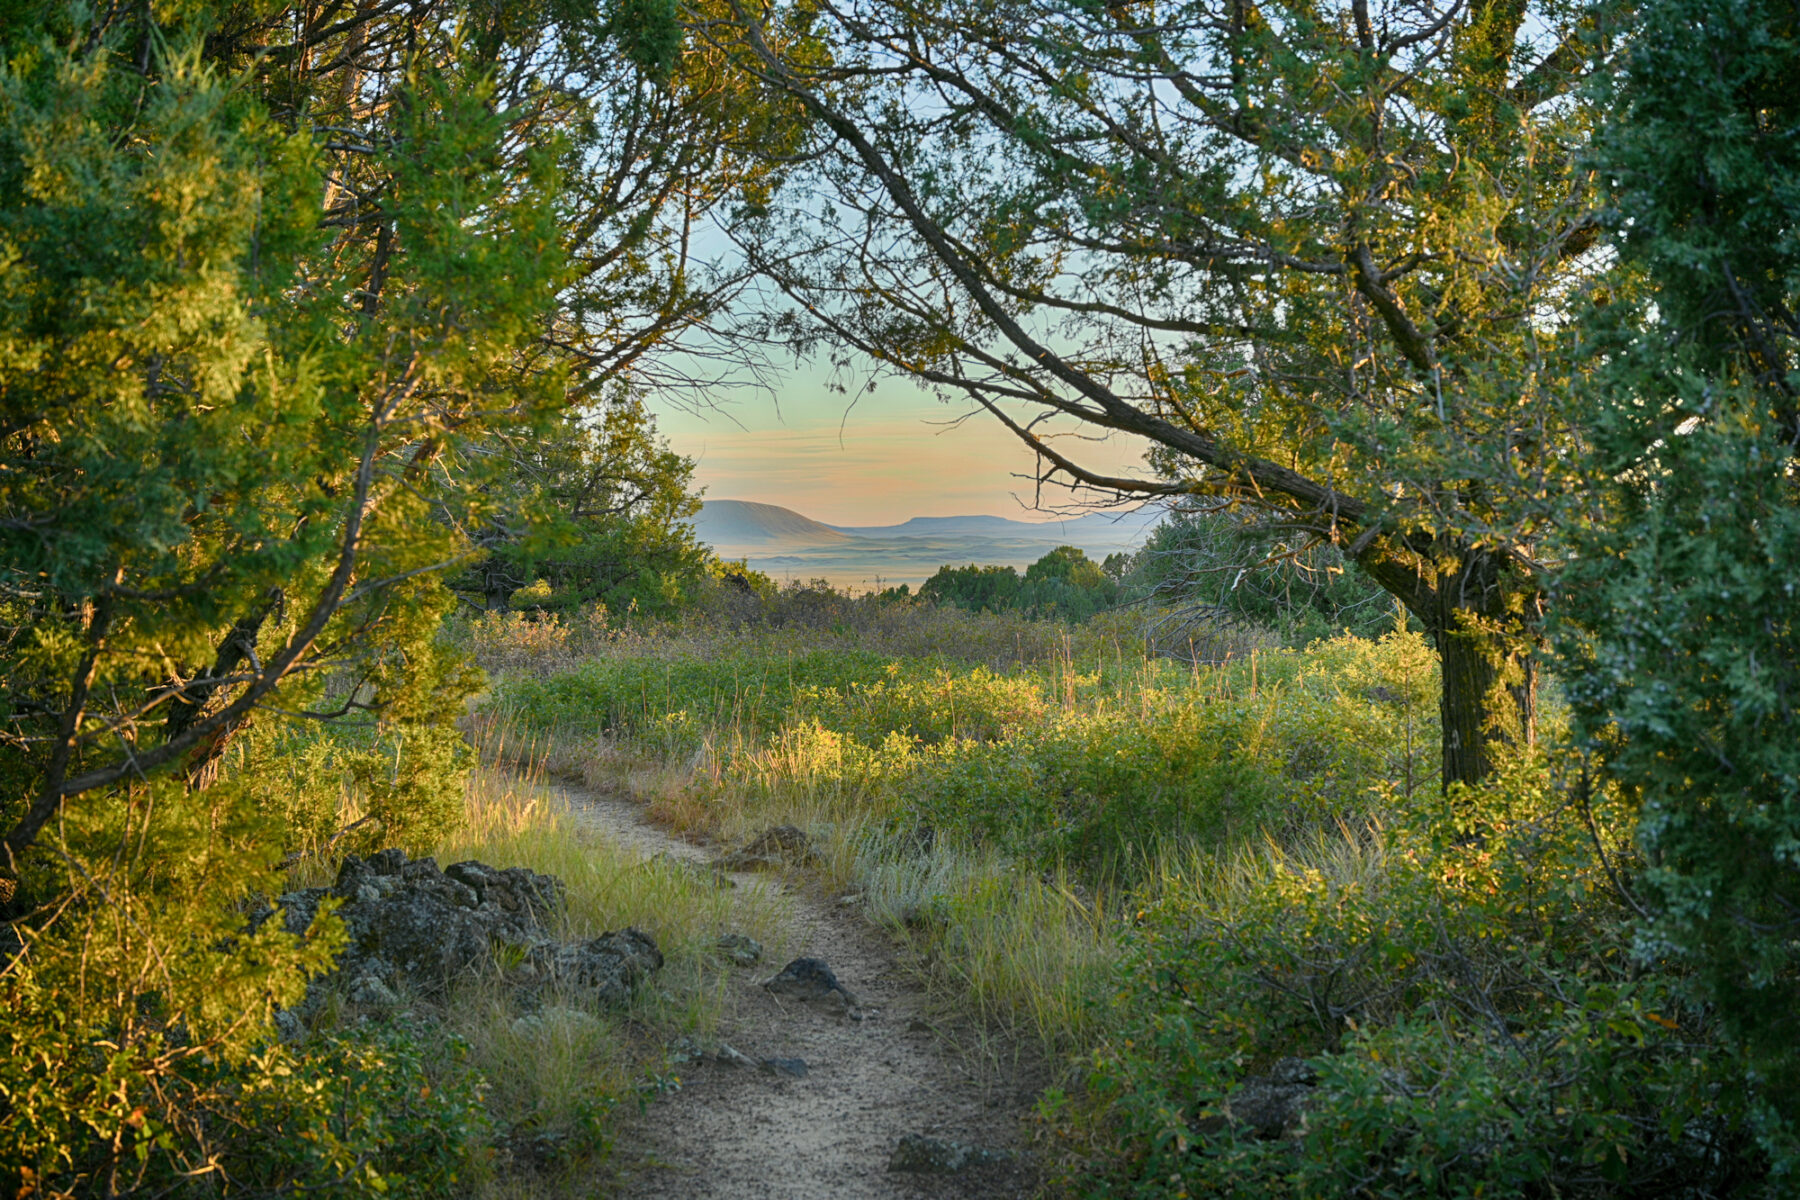 A photography titled "End of the trail Capulin National Park, NM" by Jim Schlett that shows a winding trail in the center of the photo edged by trees with mountains in the distance